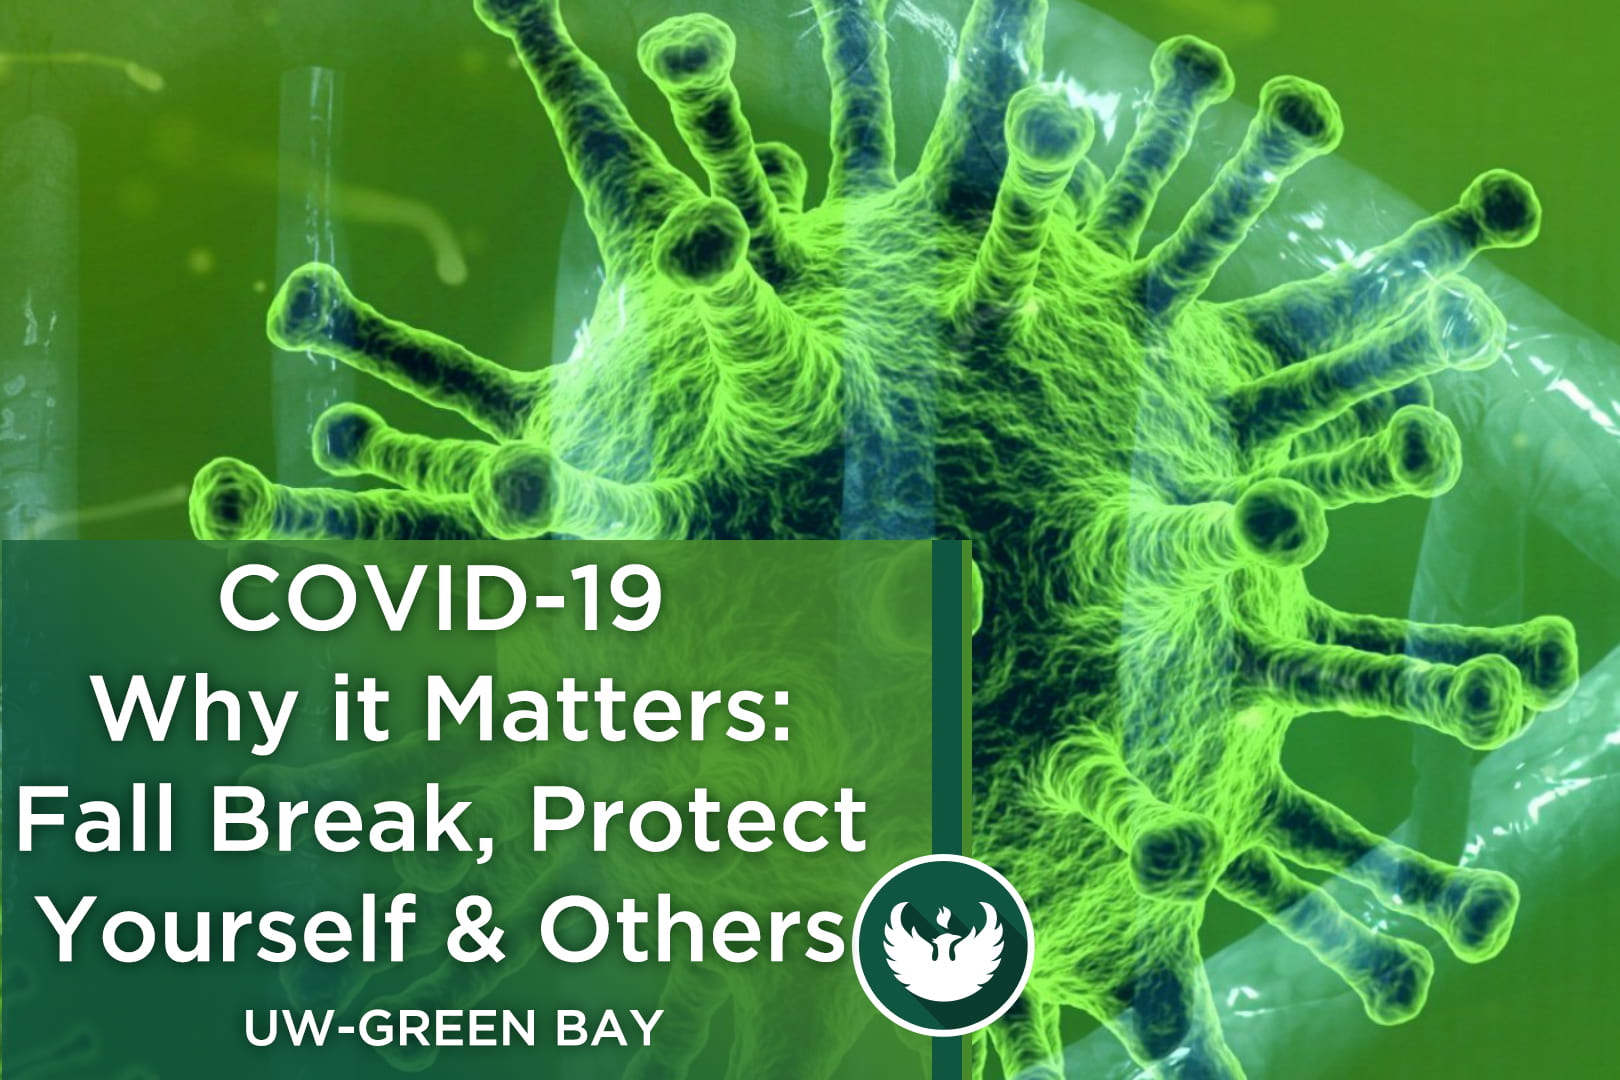 Photo of the Covid-19 virus under a microscope with the text, "Covid-19 Why it matters: Fall break, protect yourself and others.